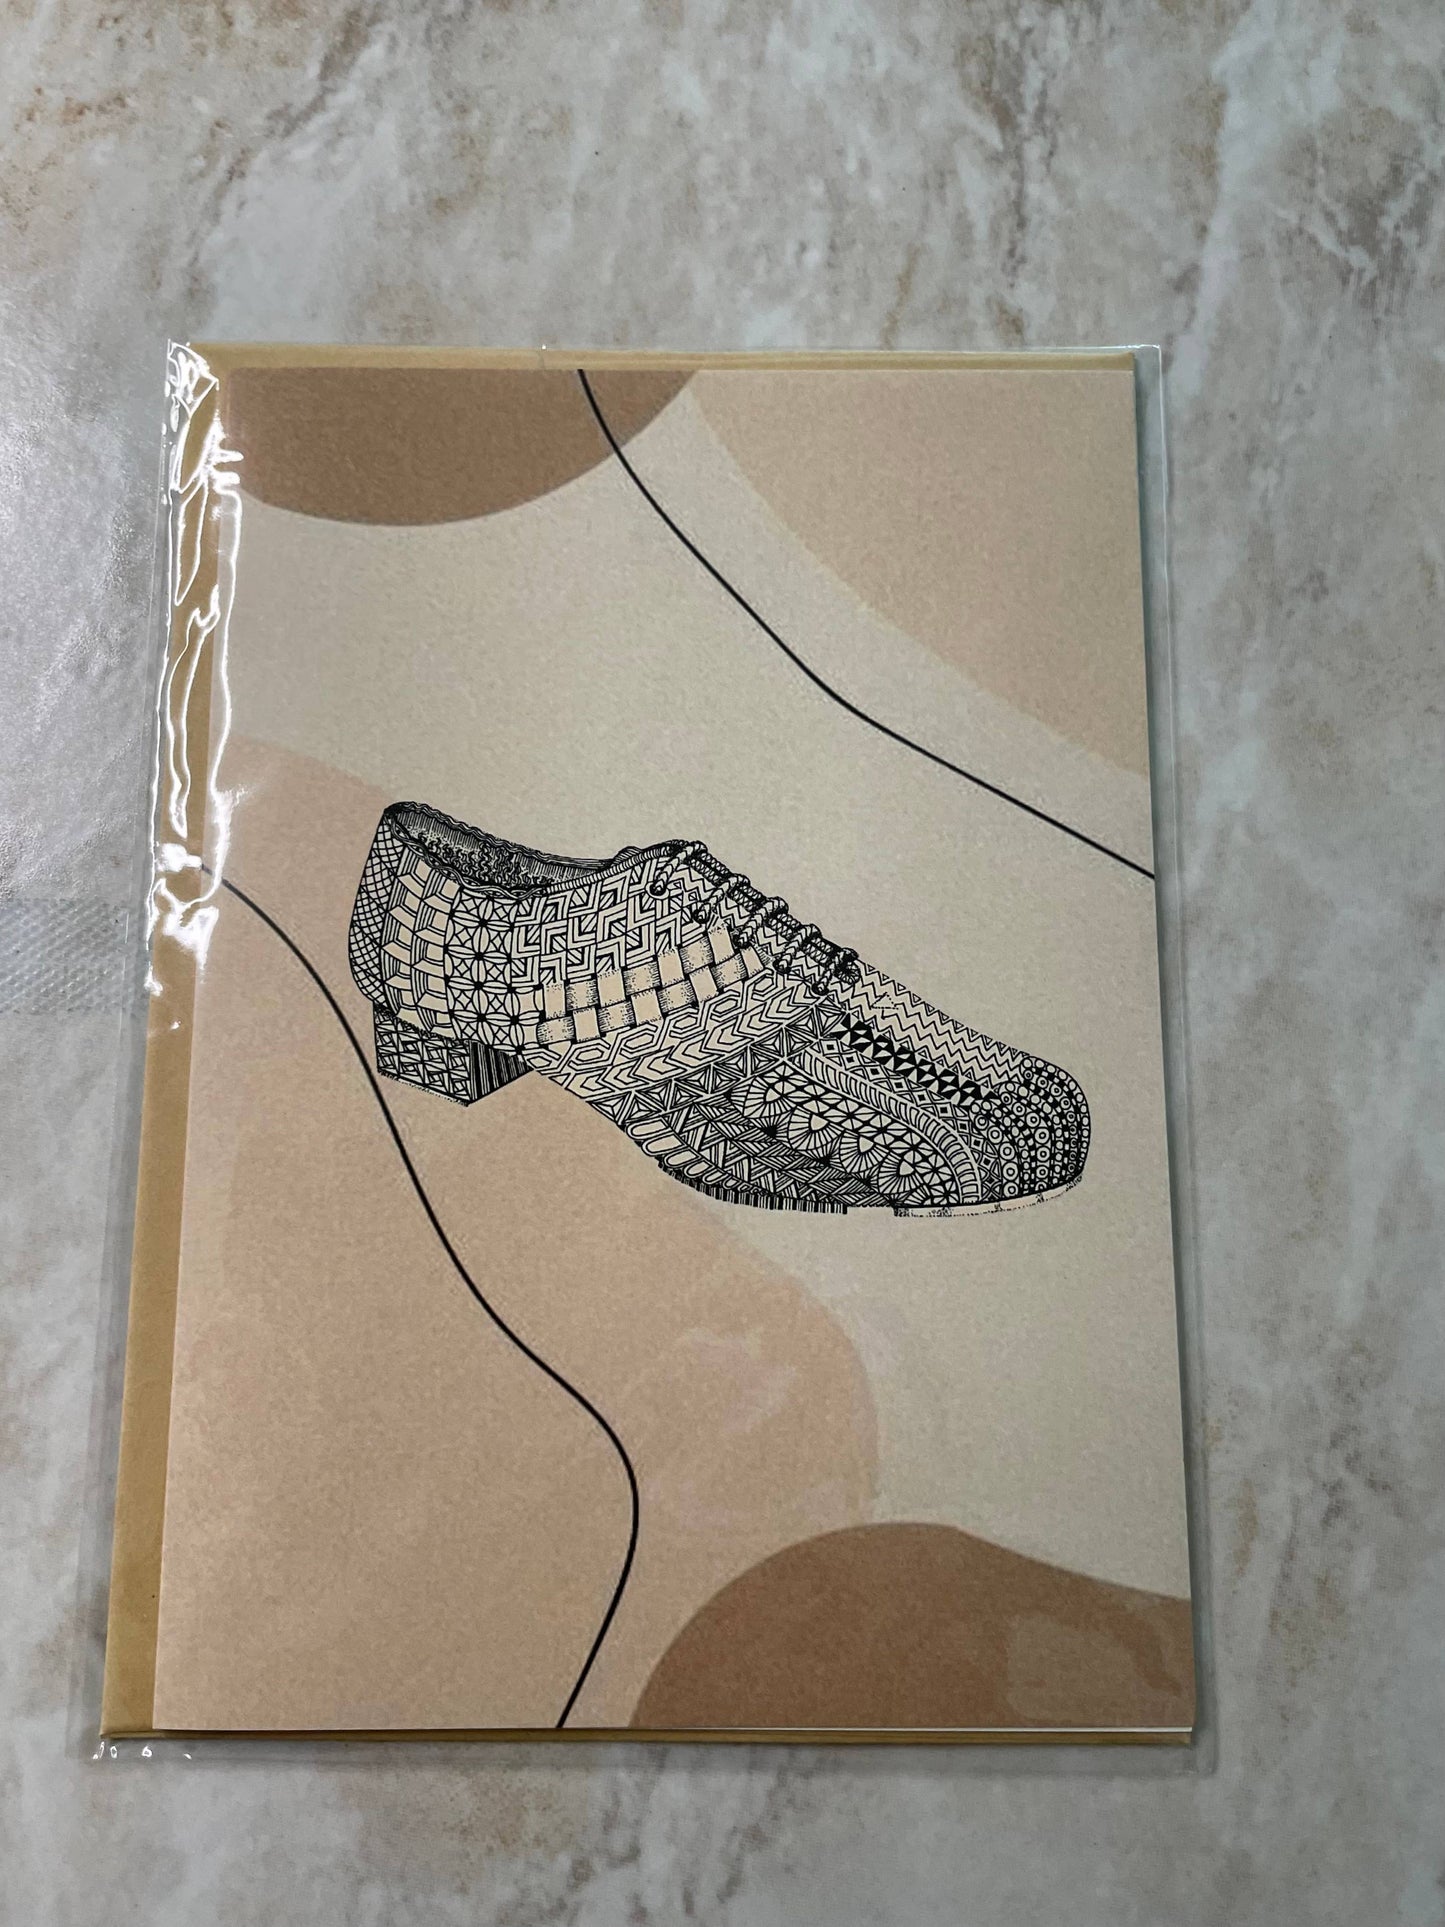 Denali & Co. Dance Shoes Greeting Cards: Sneaker Greens/Pink